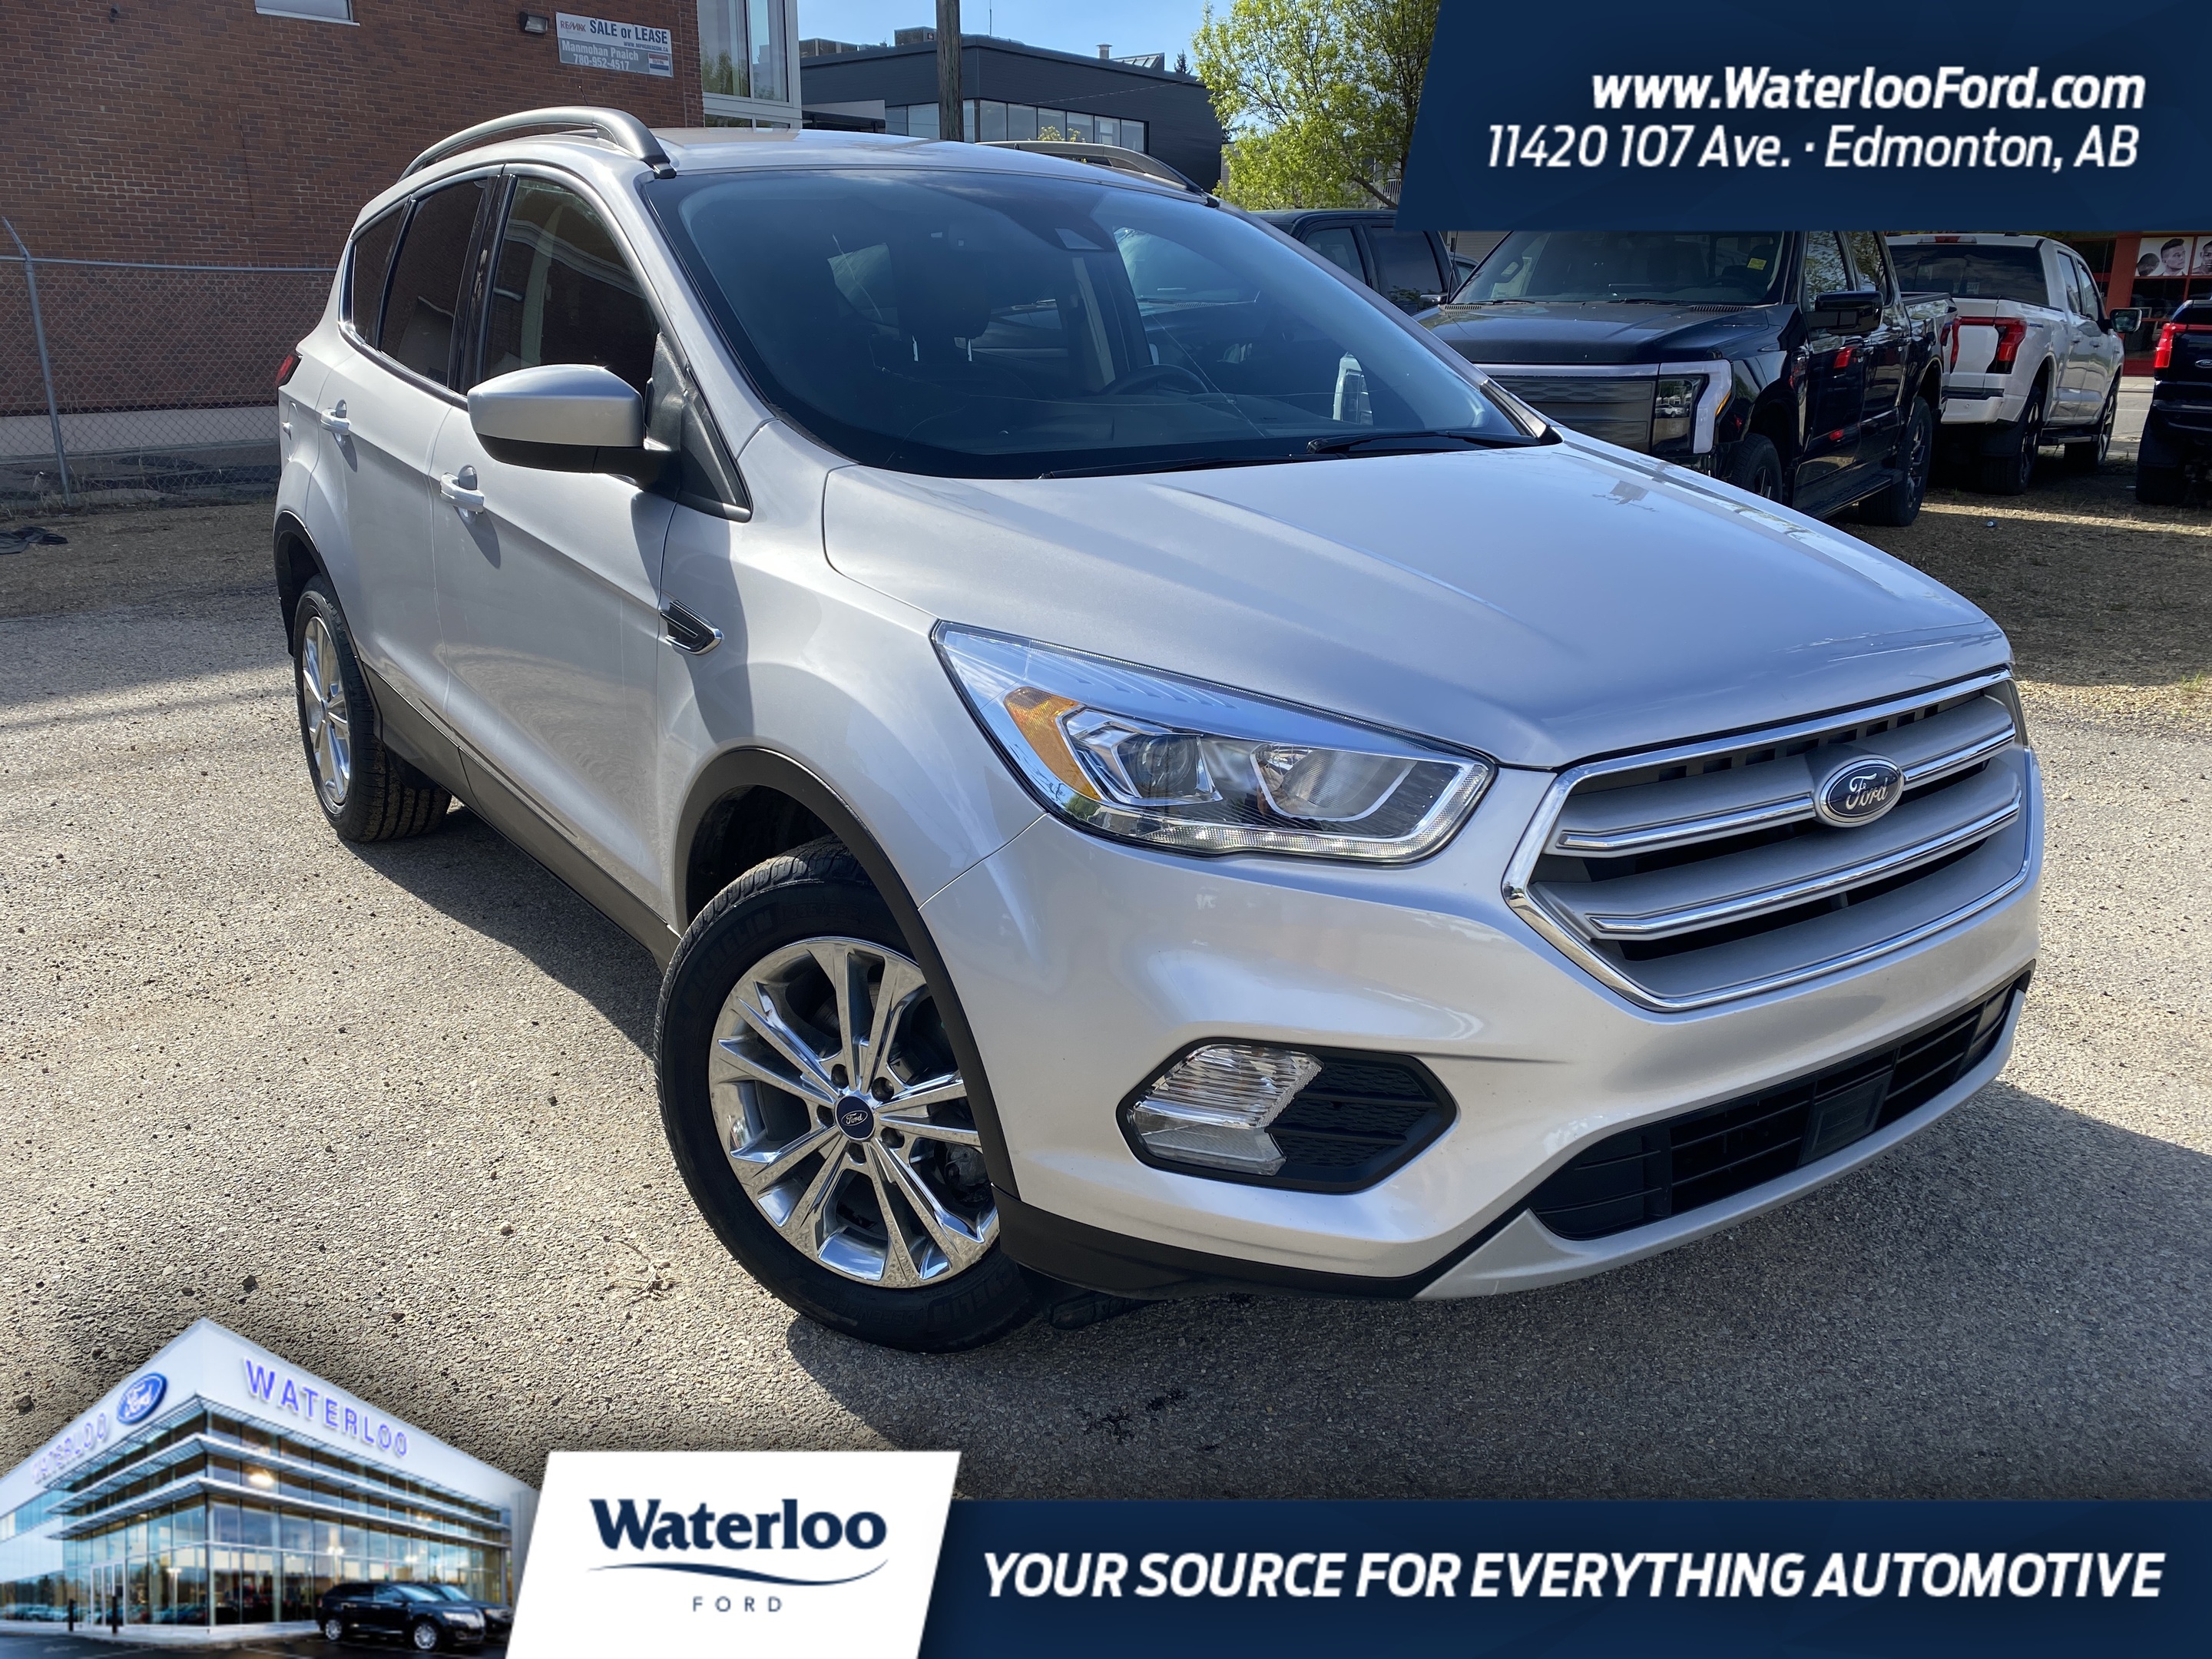 2019 Ford Escape SEL | Remote Start | Power Liftgate | Heated Seats